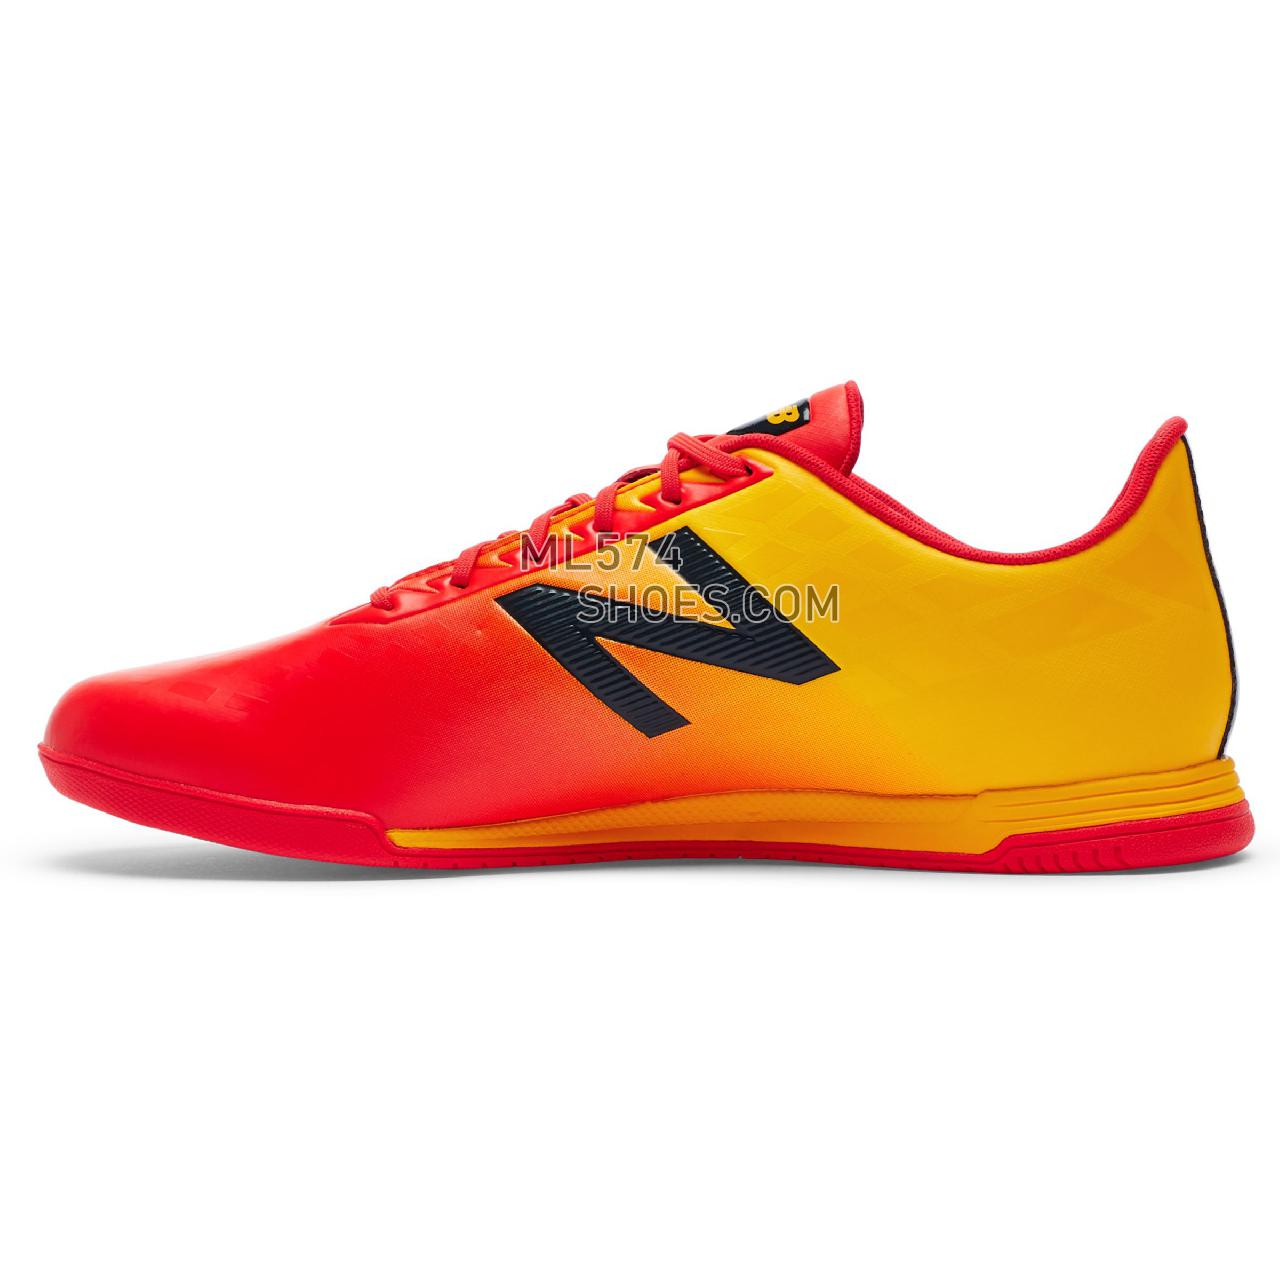 New Balance Furon v4 Dispatch IN - Men's 4 - Soccer Flame with Aztec Gold - MSFDIFA4